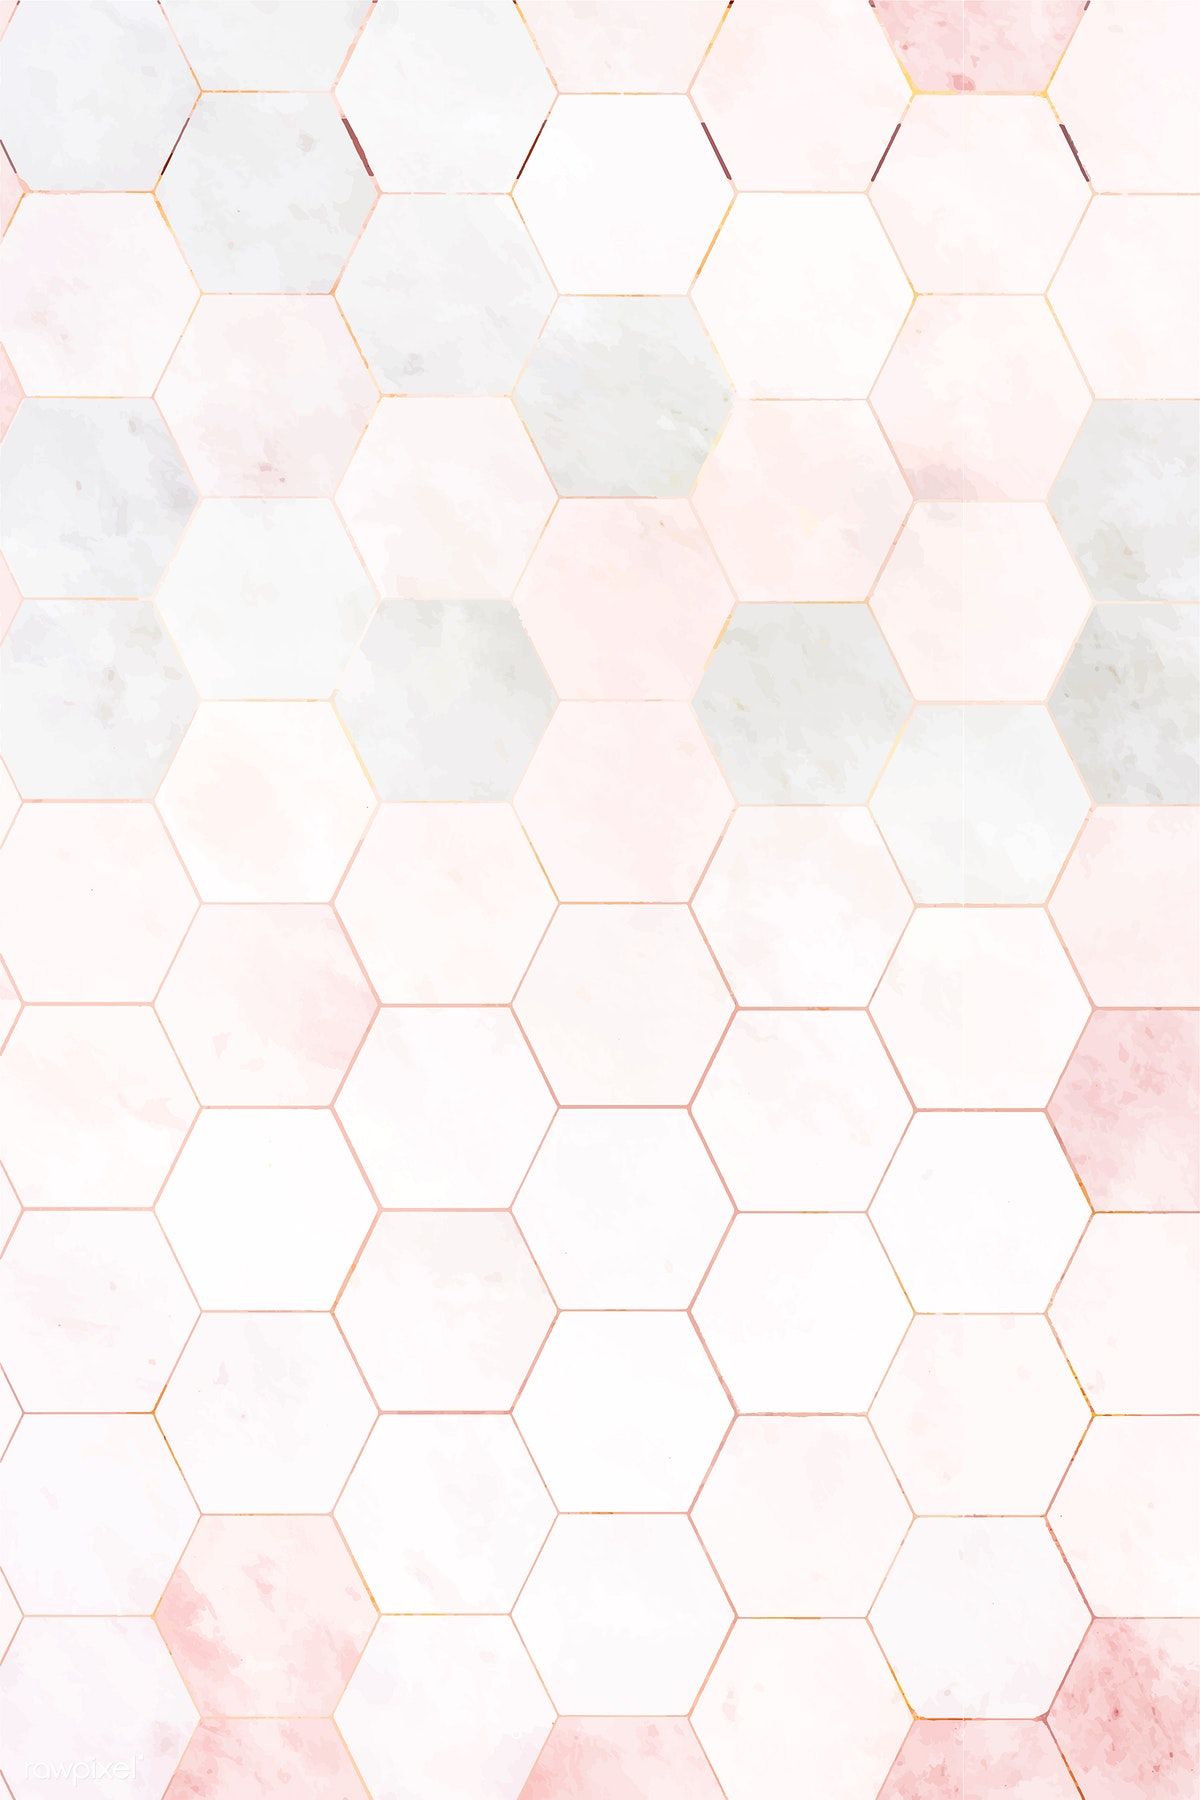 Hexagon Pink Marble Tiles Patterned Background Vector Image